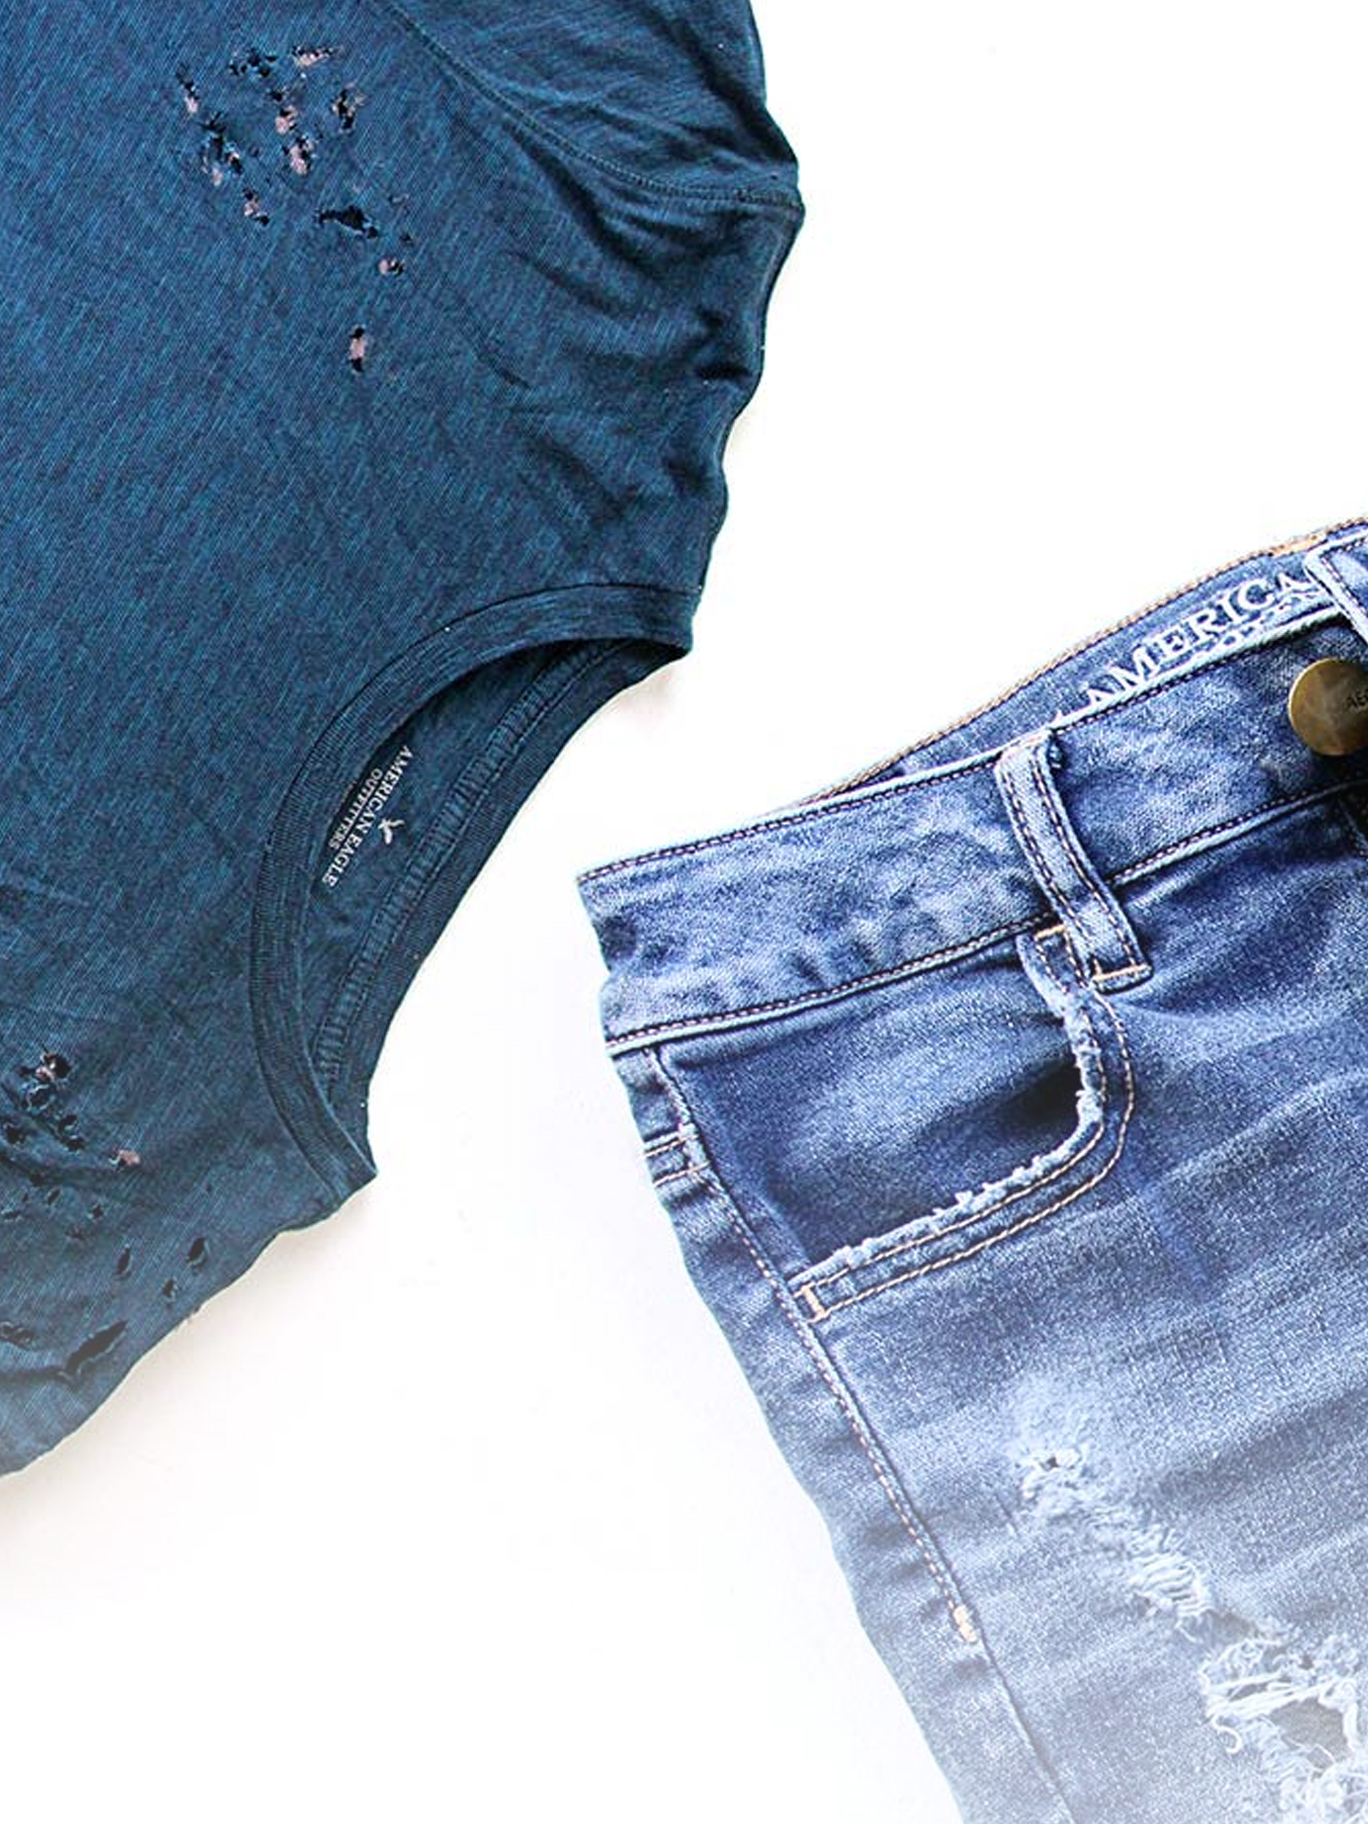 DIY: Distressed and Jeans -